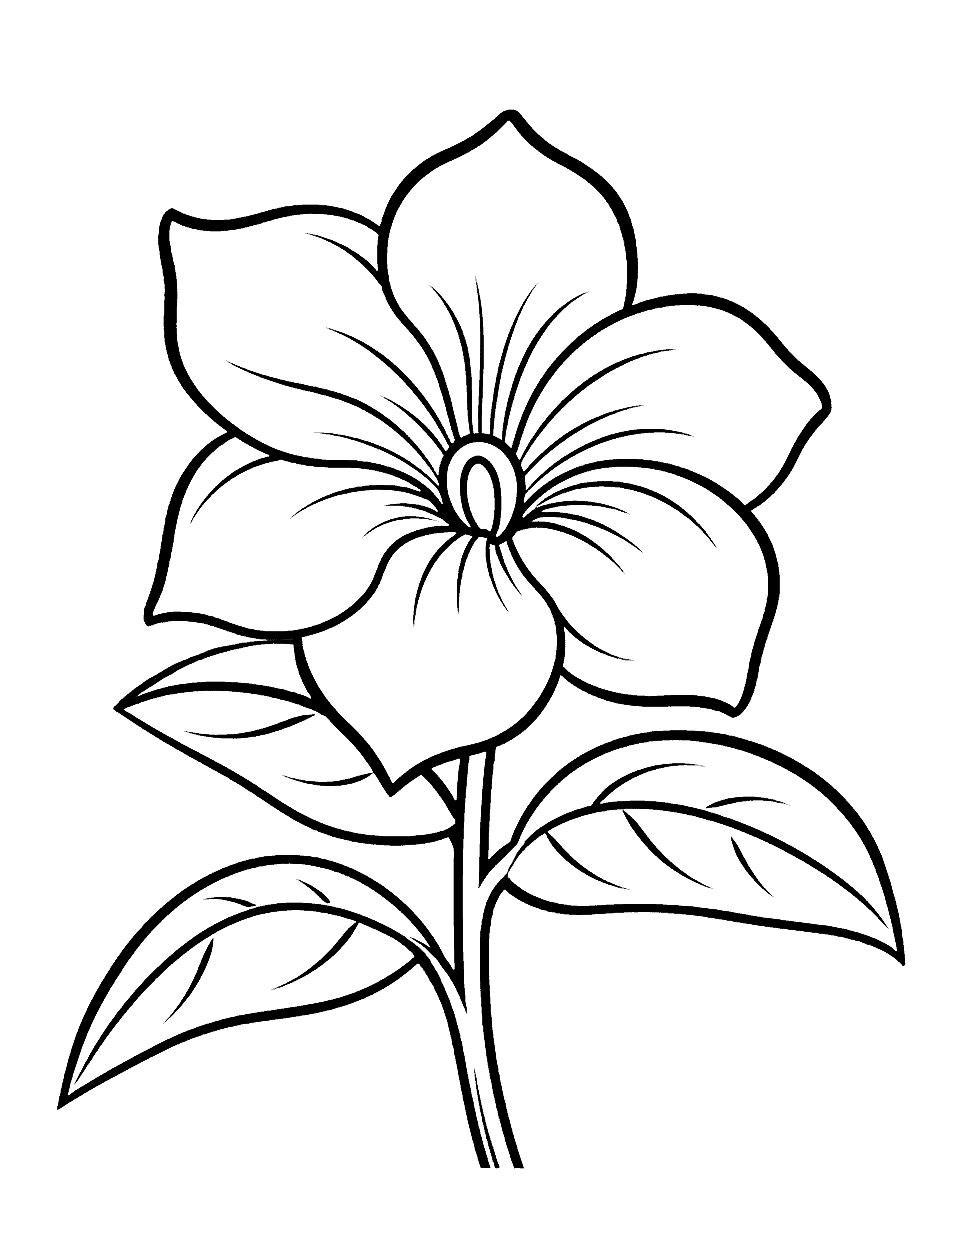 Cute Tropical Flower Coloring Page - A cute, simple drawing of a tropical flower for kindergarteners.